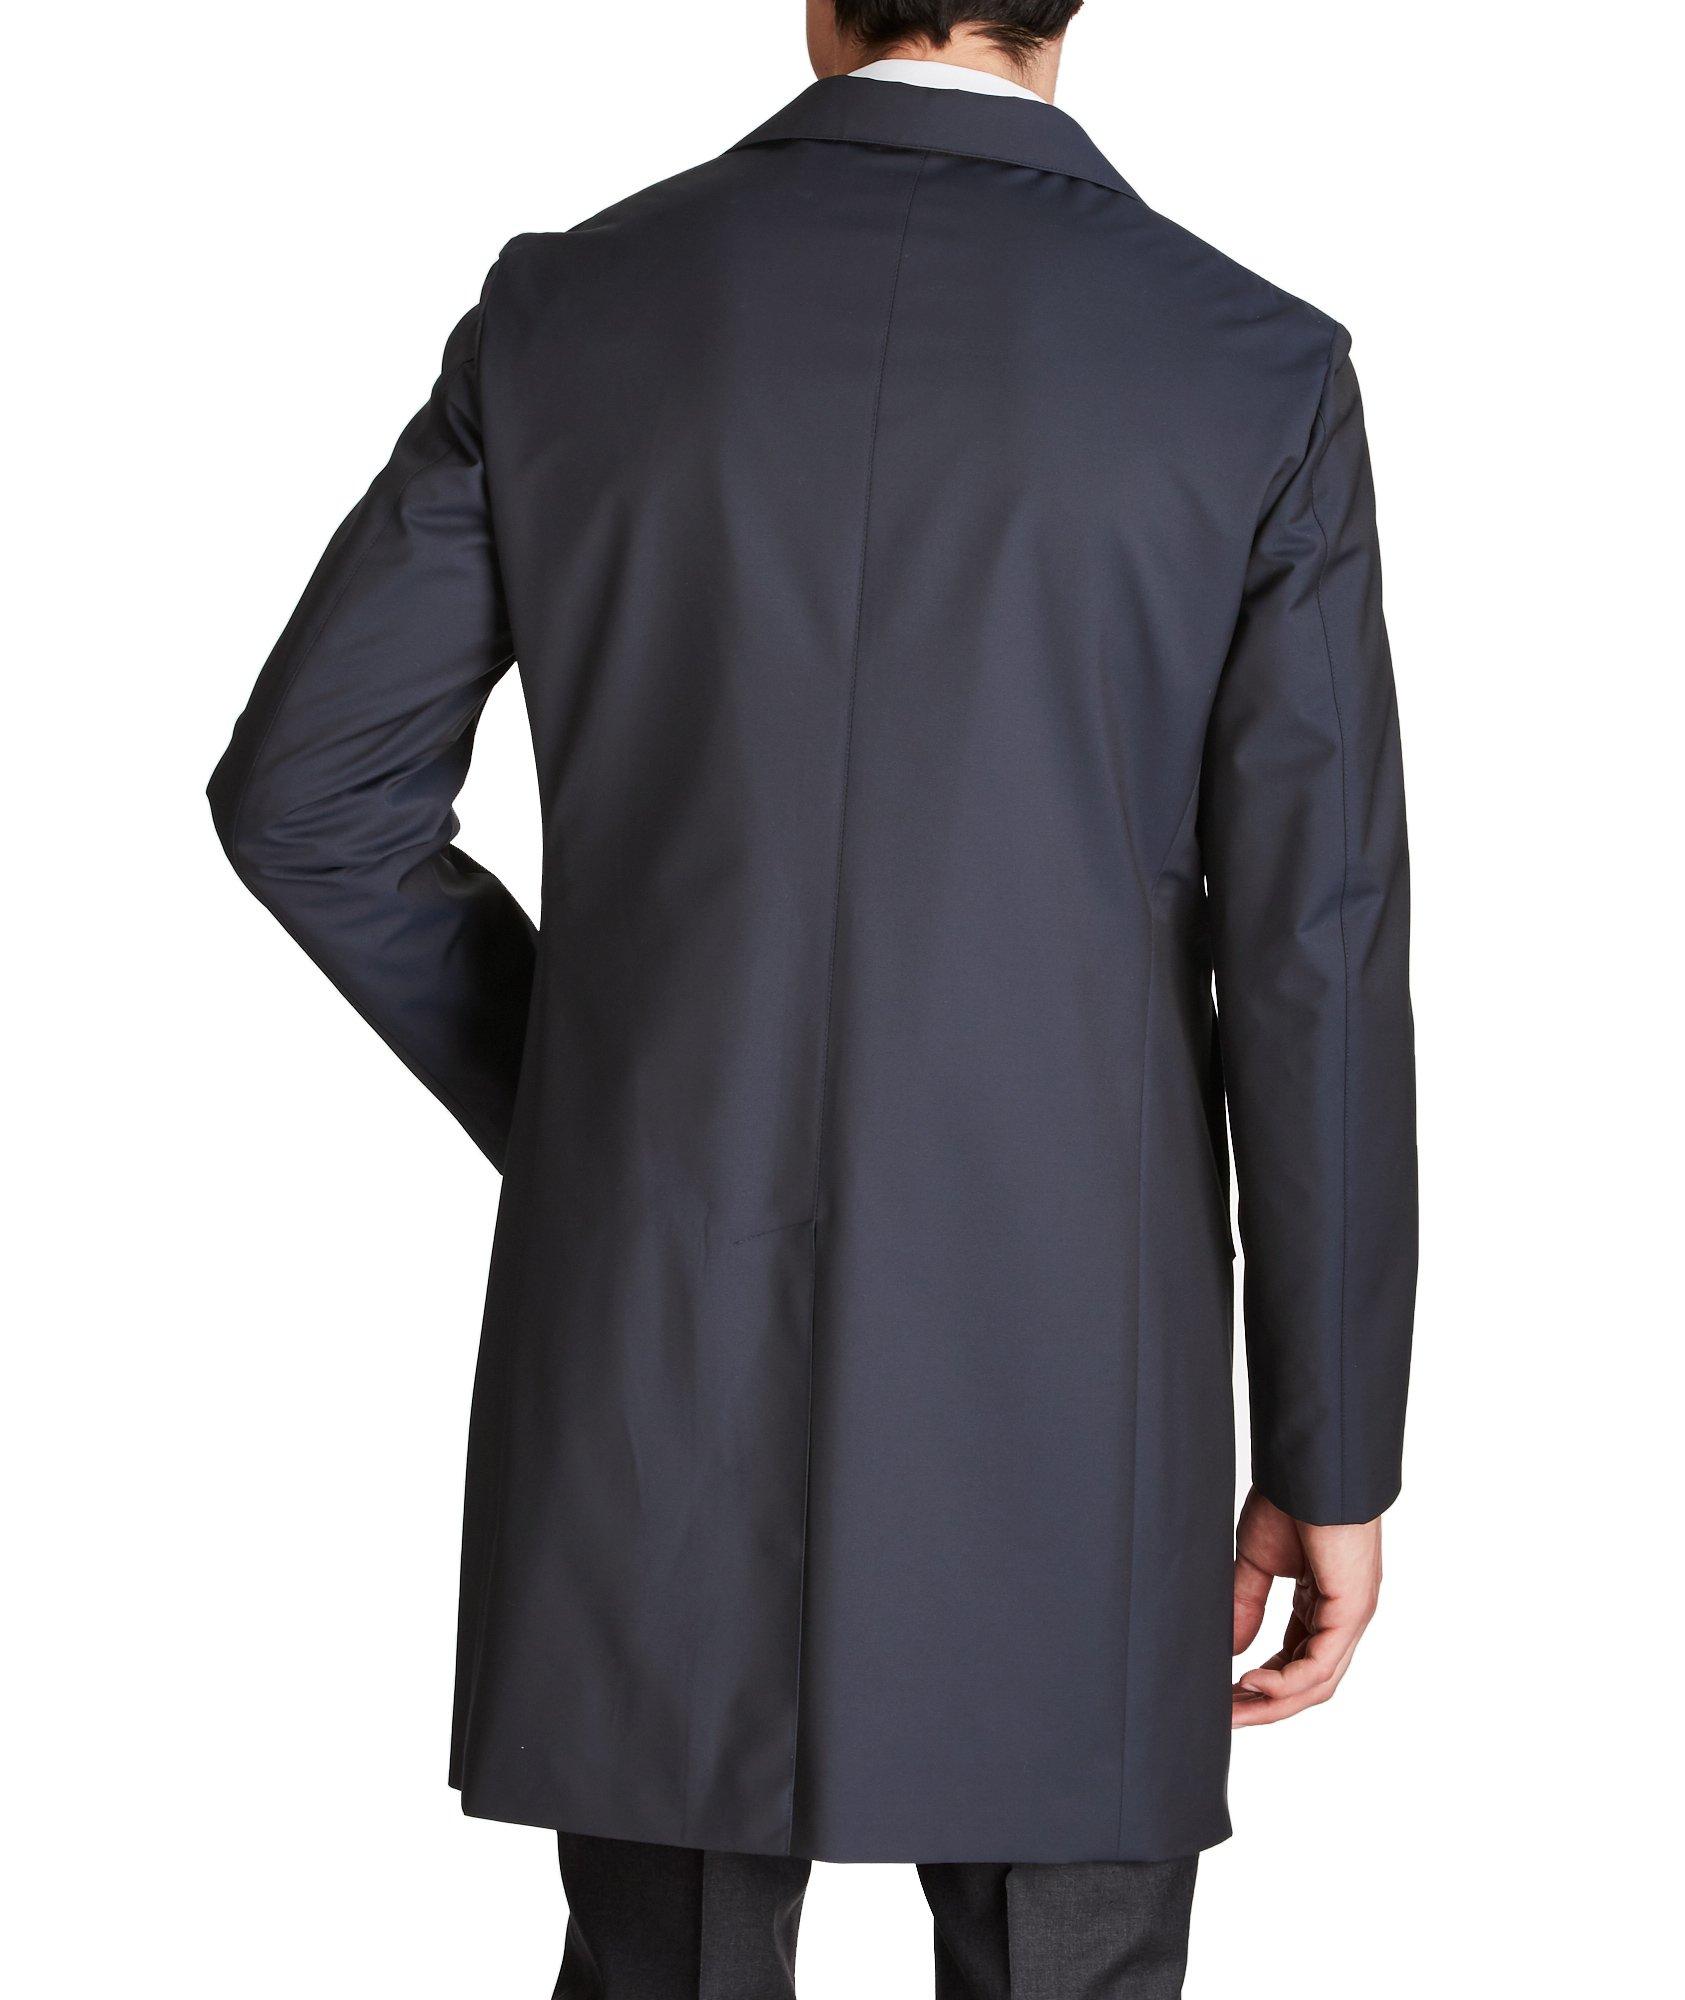 Green Technowool Storm System Coat image 1